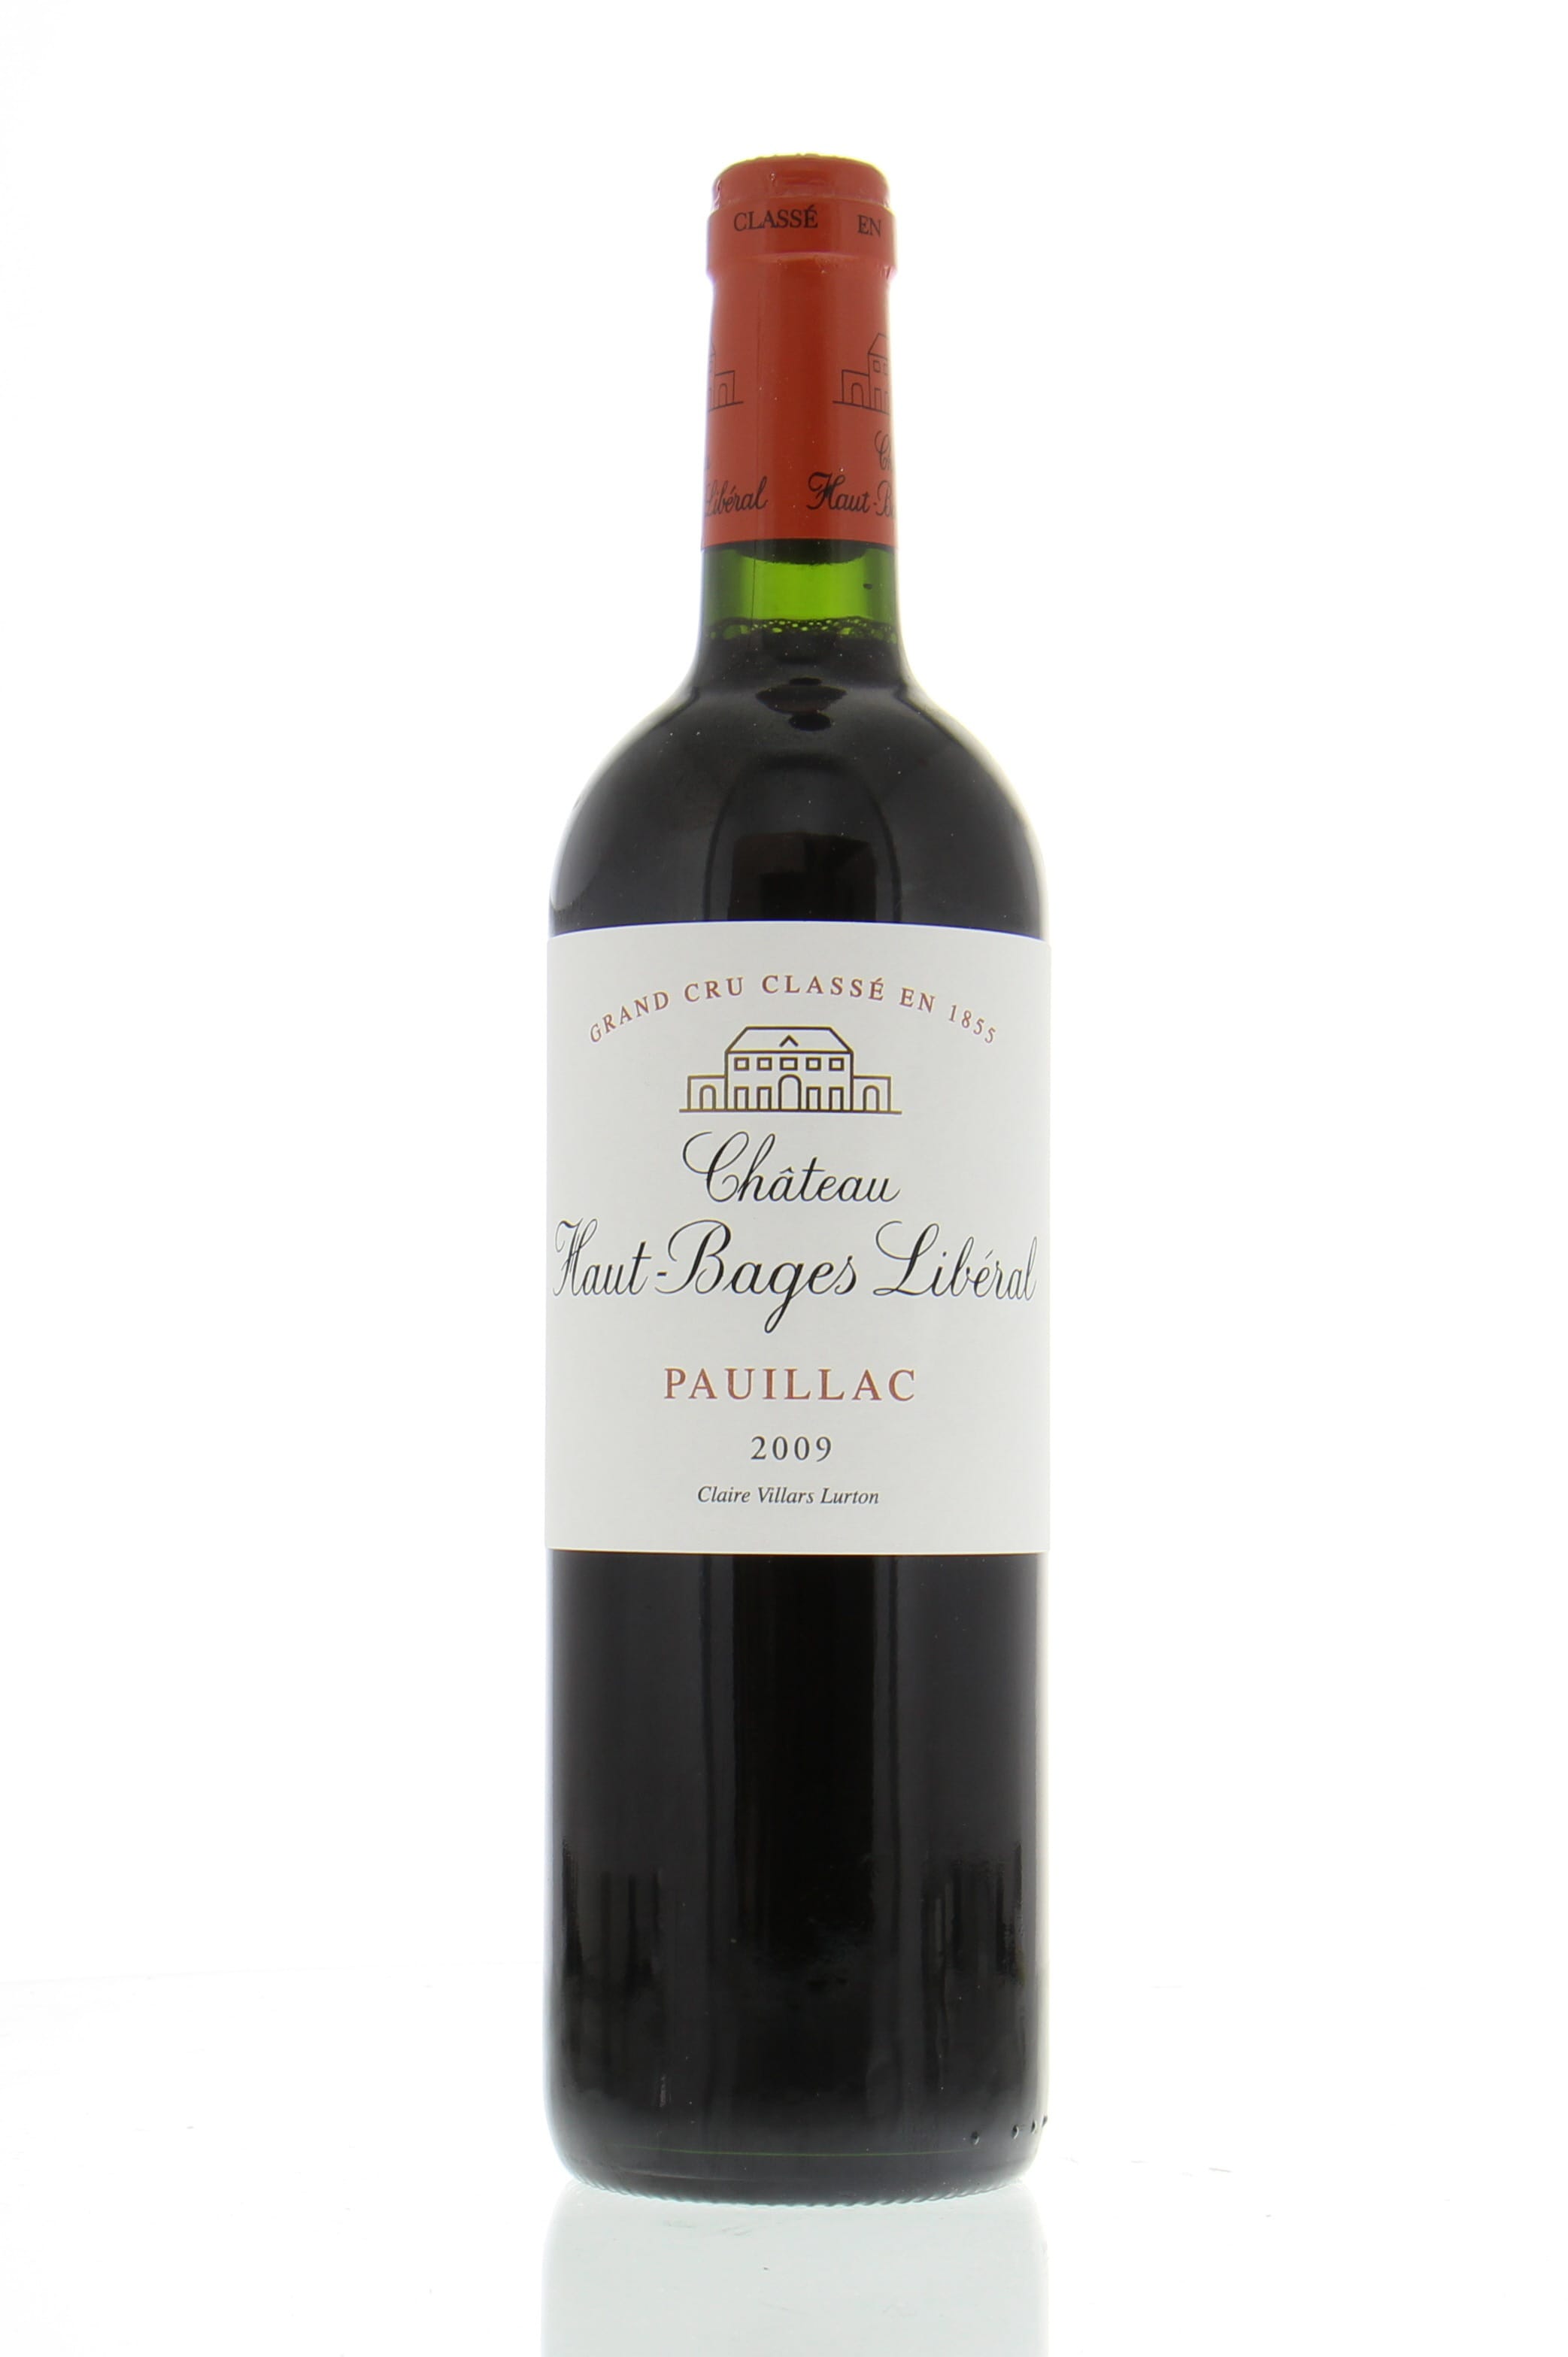 Chateau Haut Bages Liberal - Chateau Haut Bages Liberal 2009 Perfect